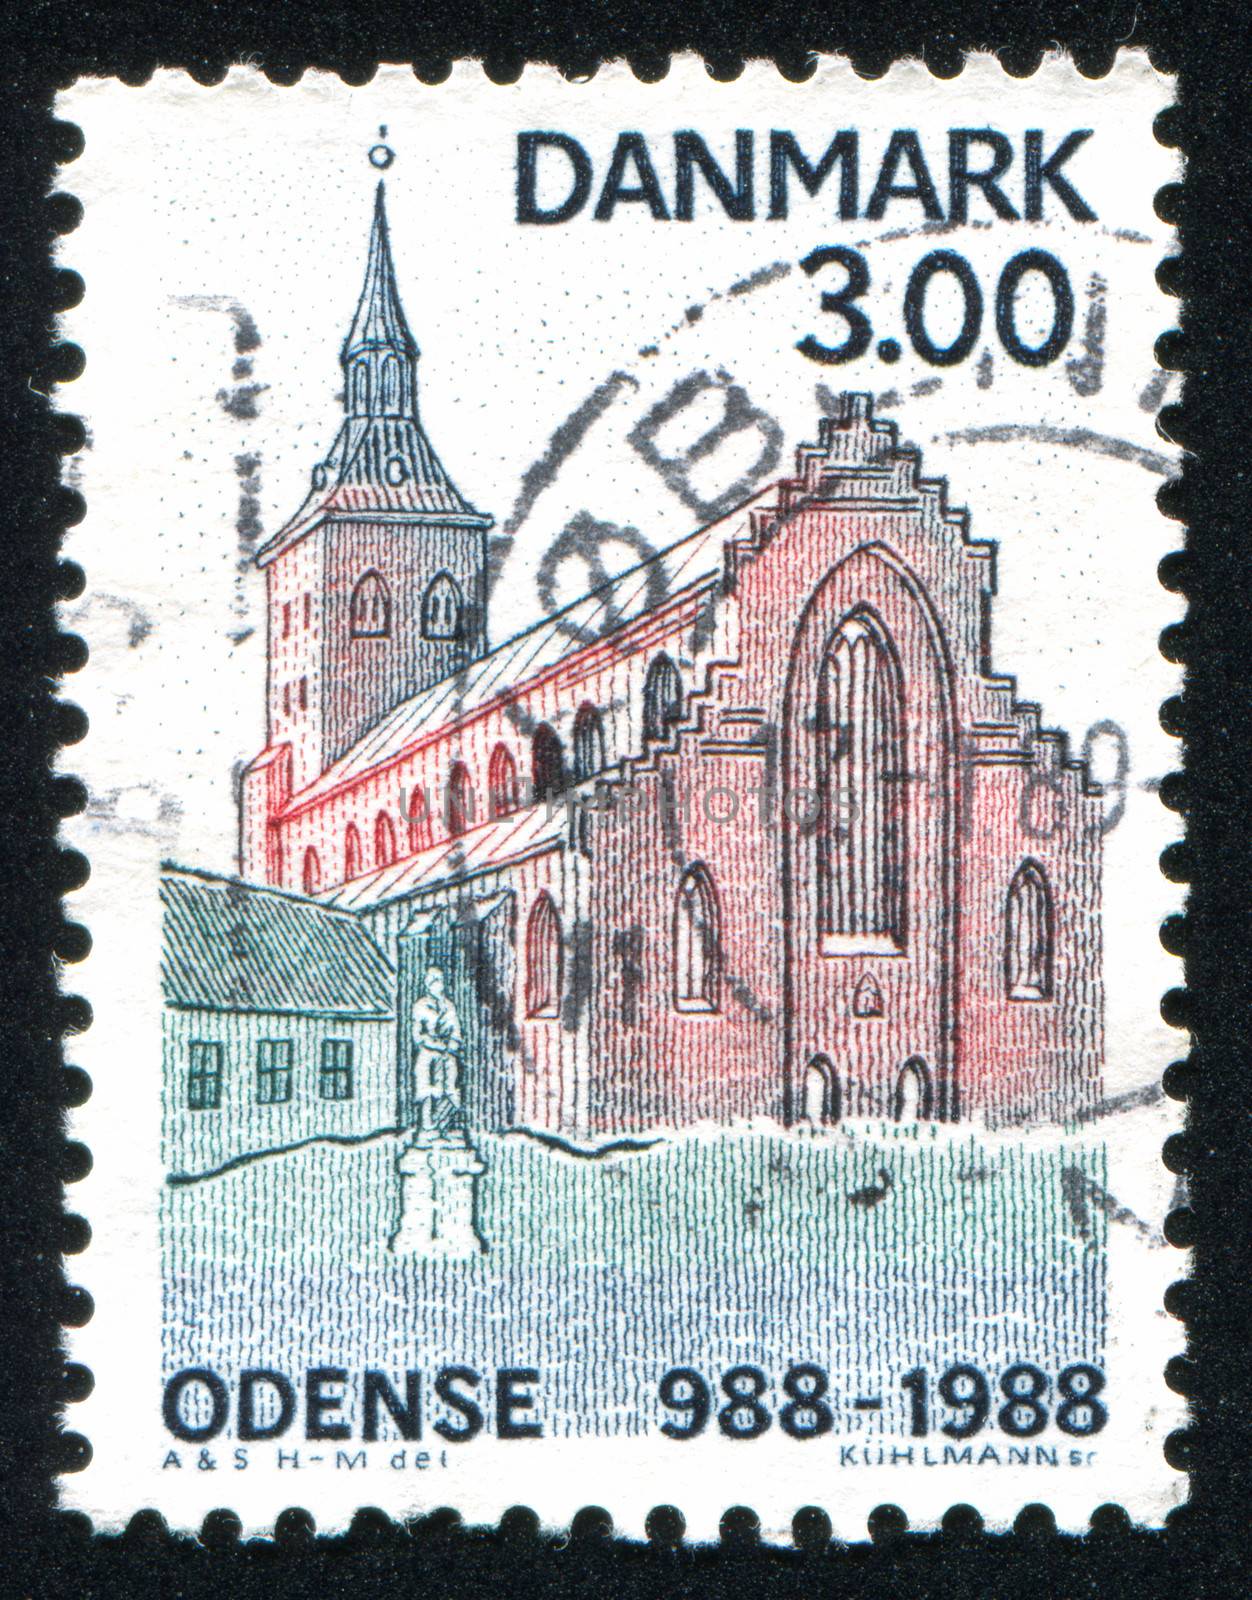 DENMARK - CIRCA 1988: stamp printed by Denmark, shows St. Cnut���s Church and statue of Hans Christian Andersen, Odense, circa 1988